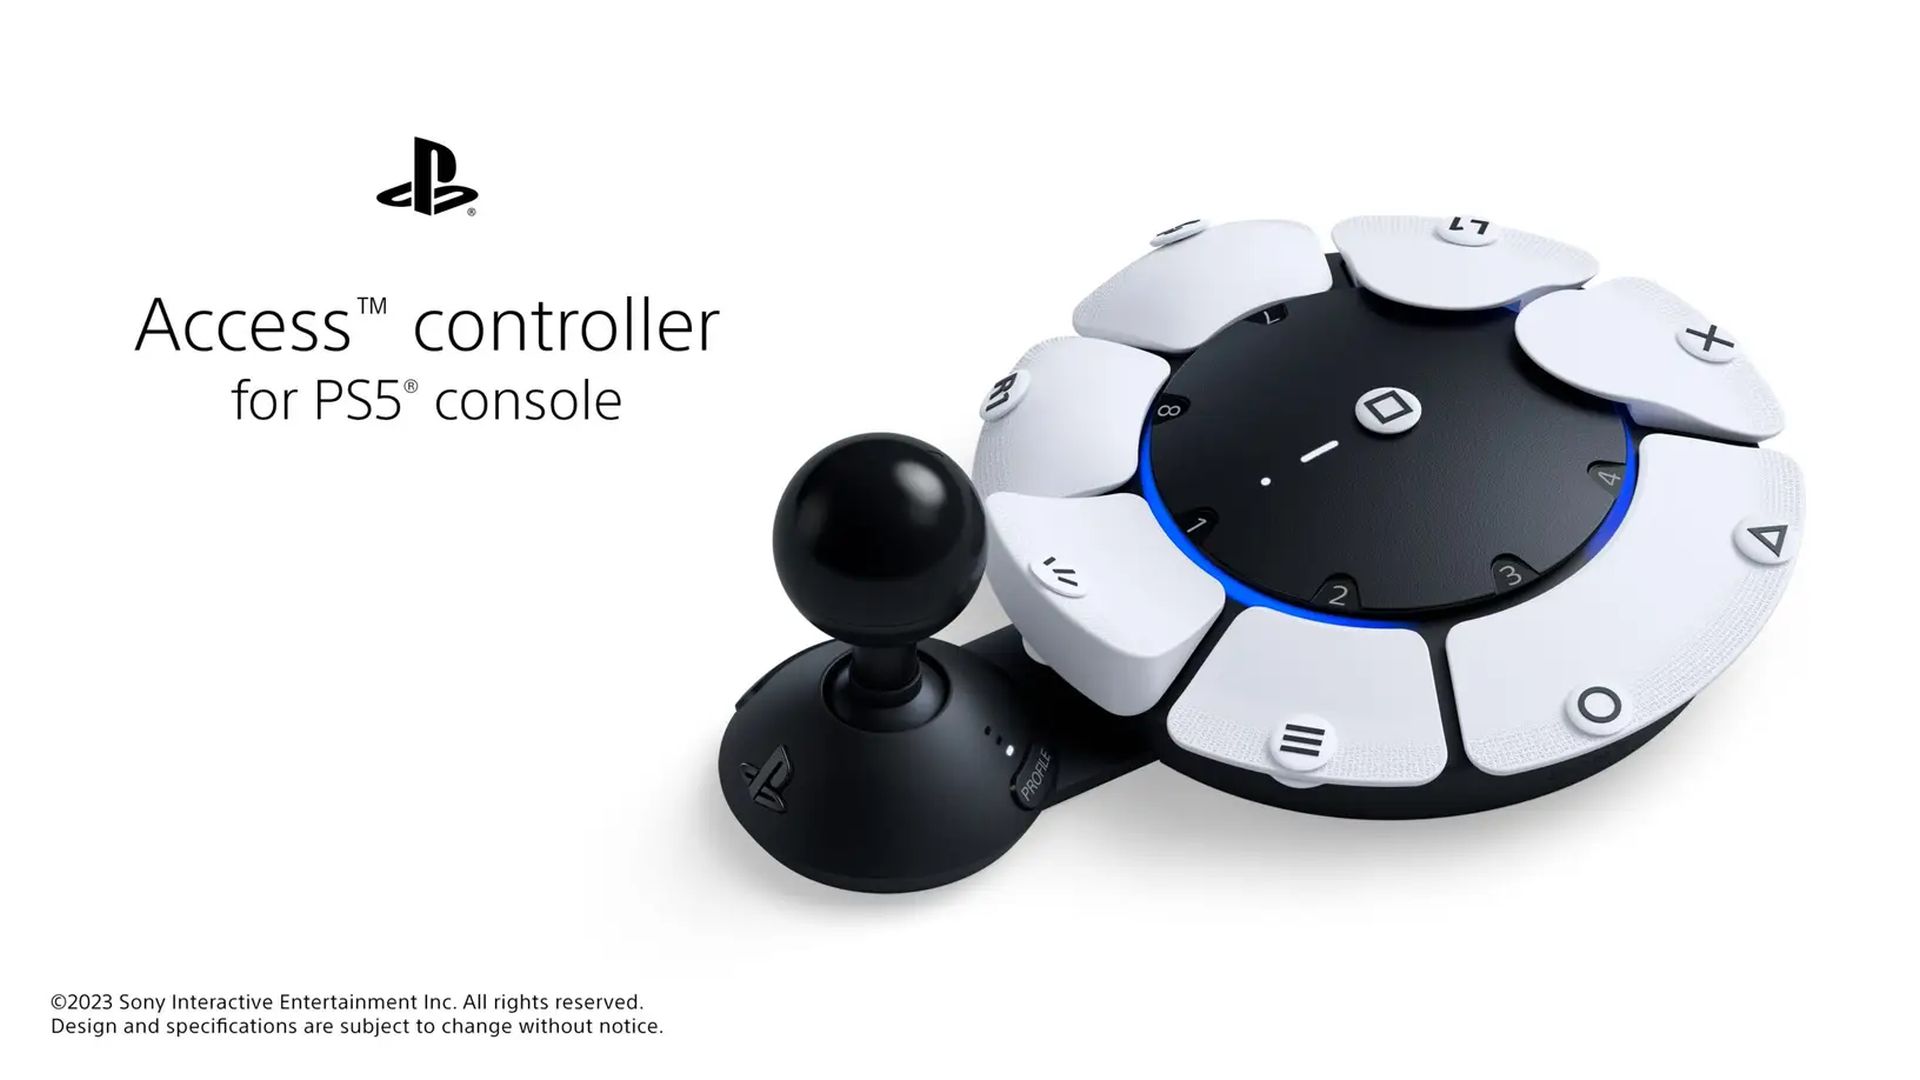 Access Controller for PS5 Launches on December 6th for .99